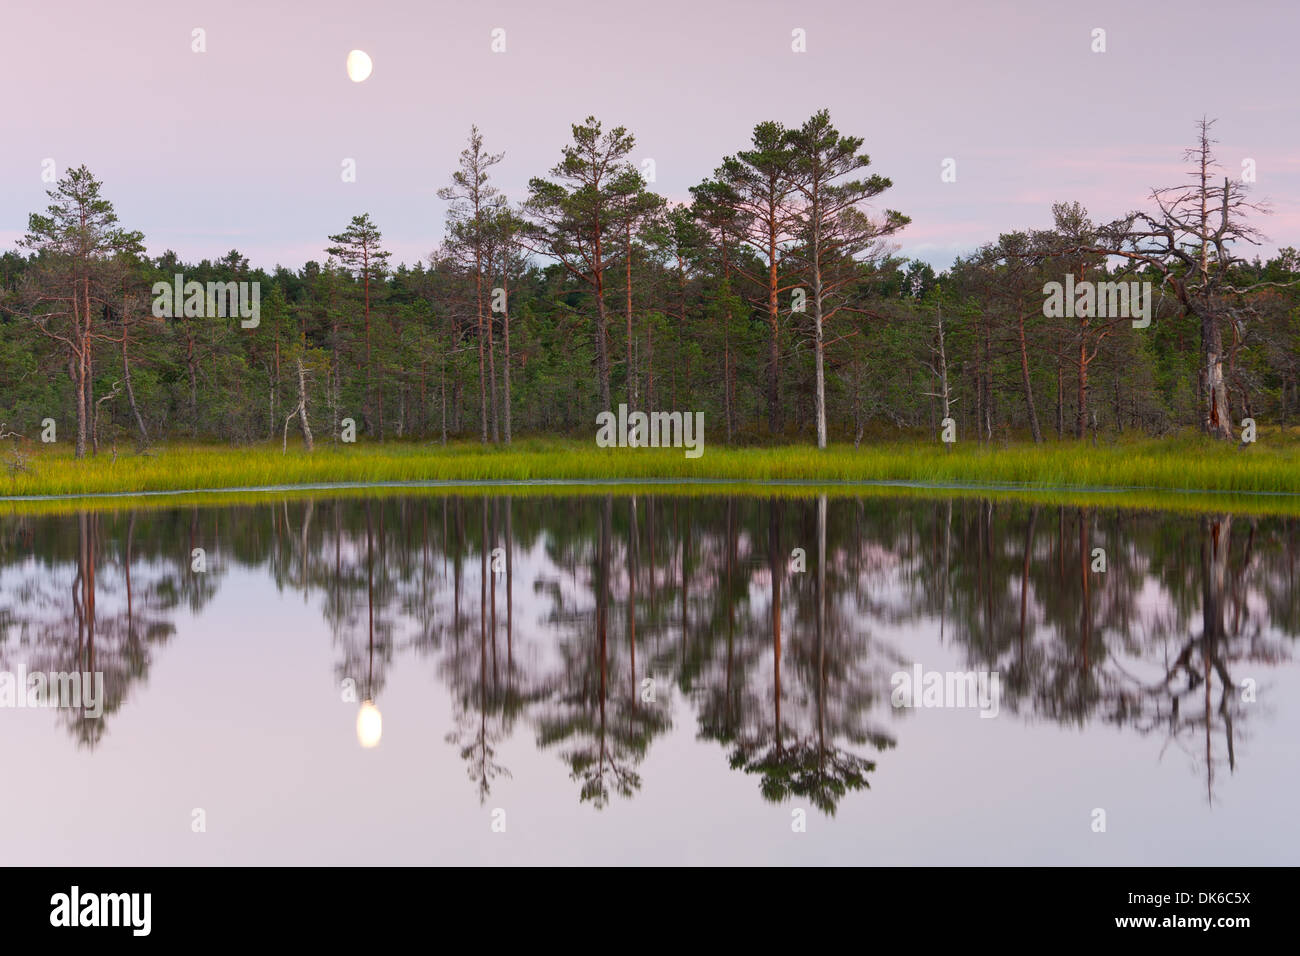 Lake in a bog, trees in background, reflections on water and moon in the sky. Stock Photo